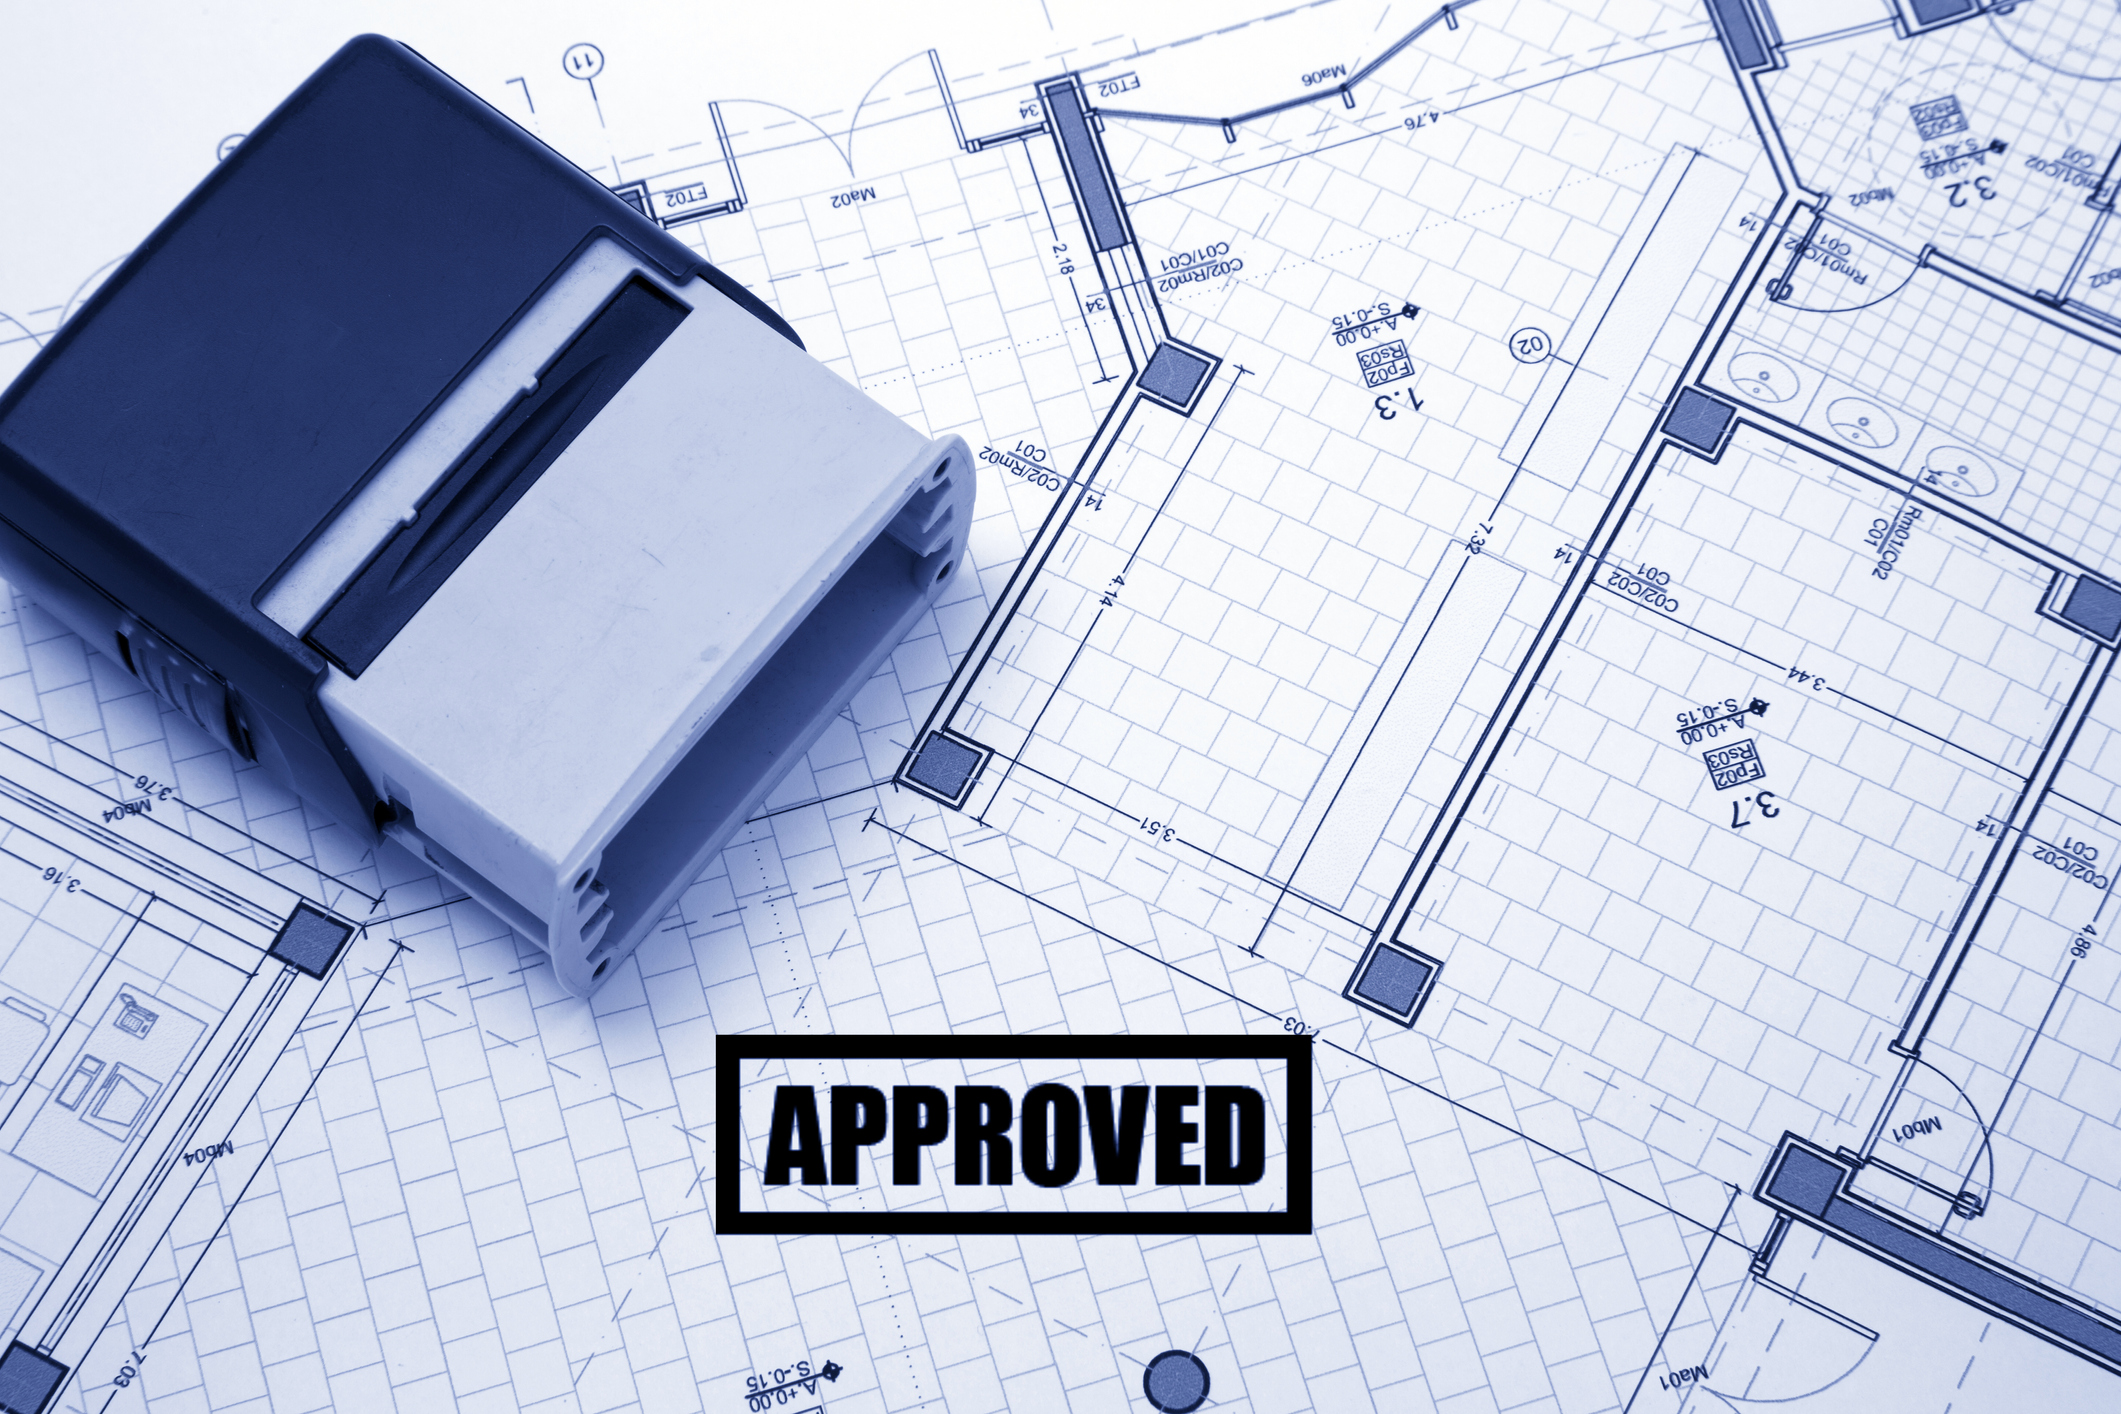 5 Tips for Quick Planning Permission Approval